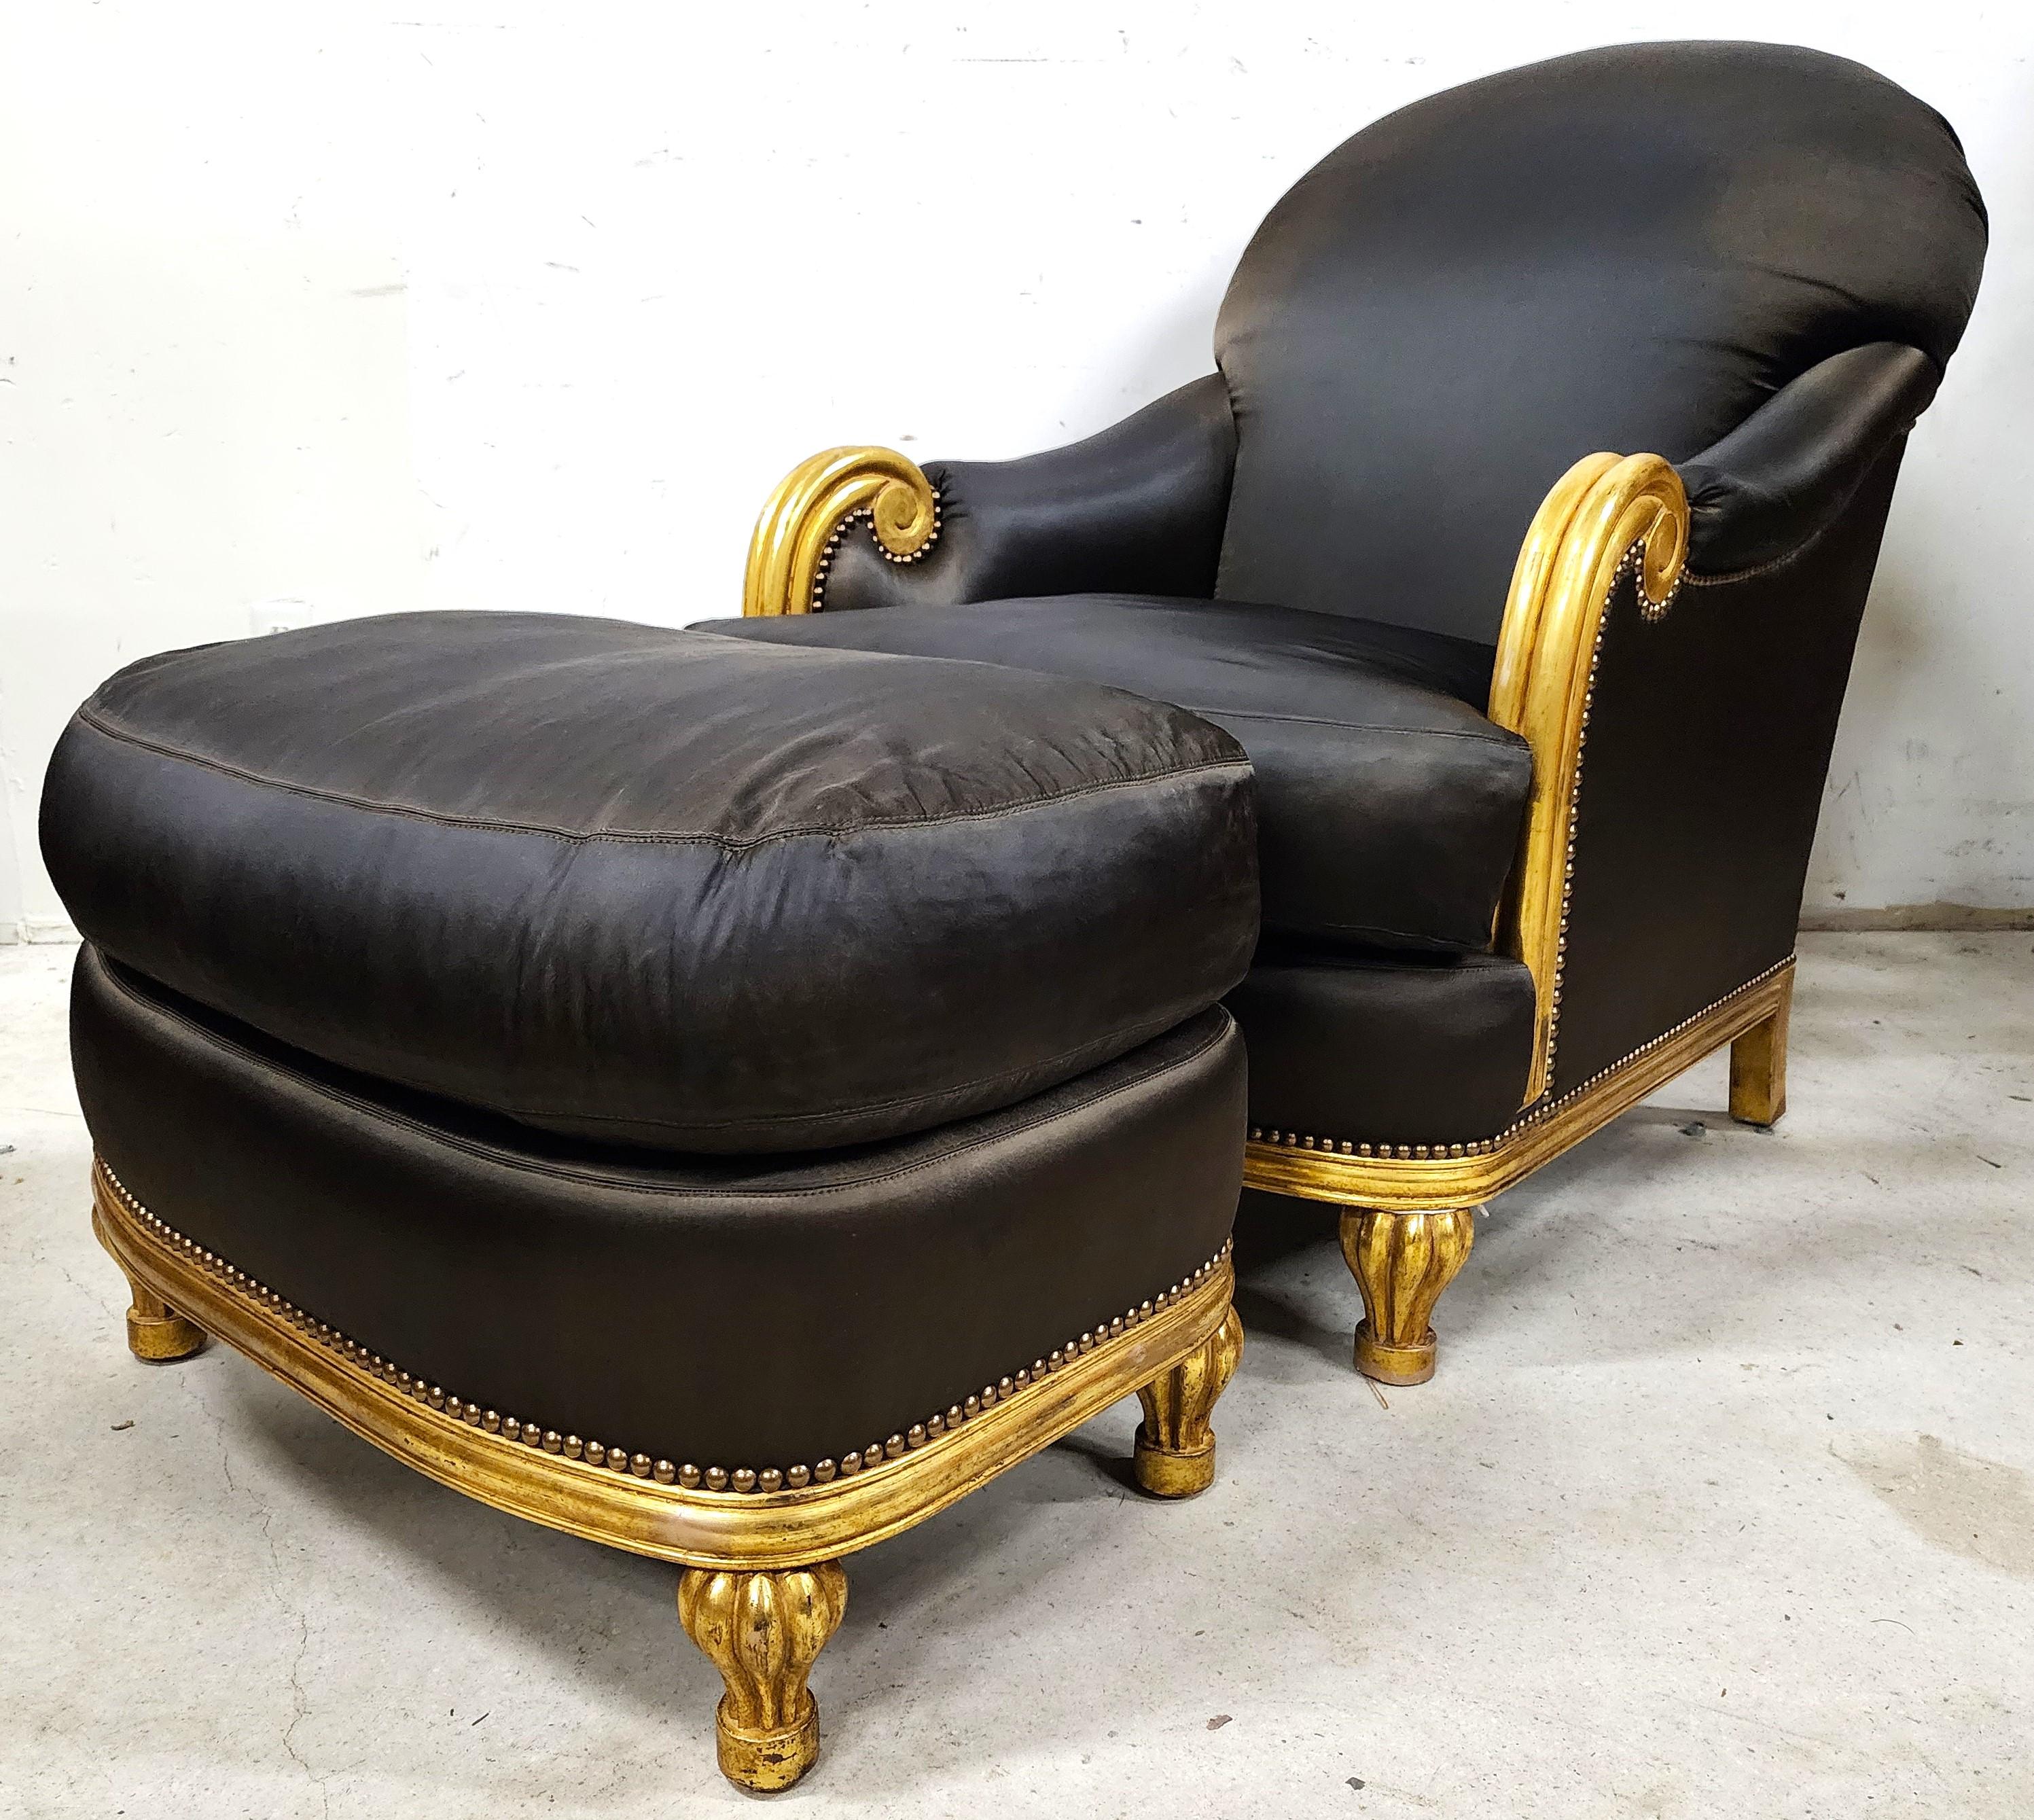 For FULL item description click on CONTINUE READING at the bottom of this page.

Offering One Of Our Recent Palm Beach Estate Fine Furniture Acquisitions Of A
Very High-End Magnificent Art Deco Gold Leaf Gilt Finish Club Chair & Ottoman
Very